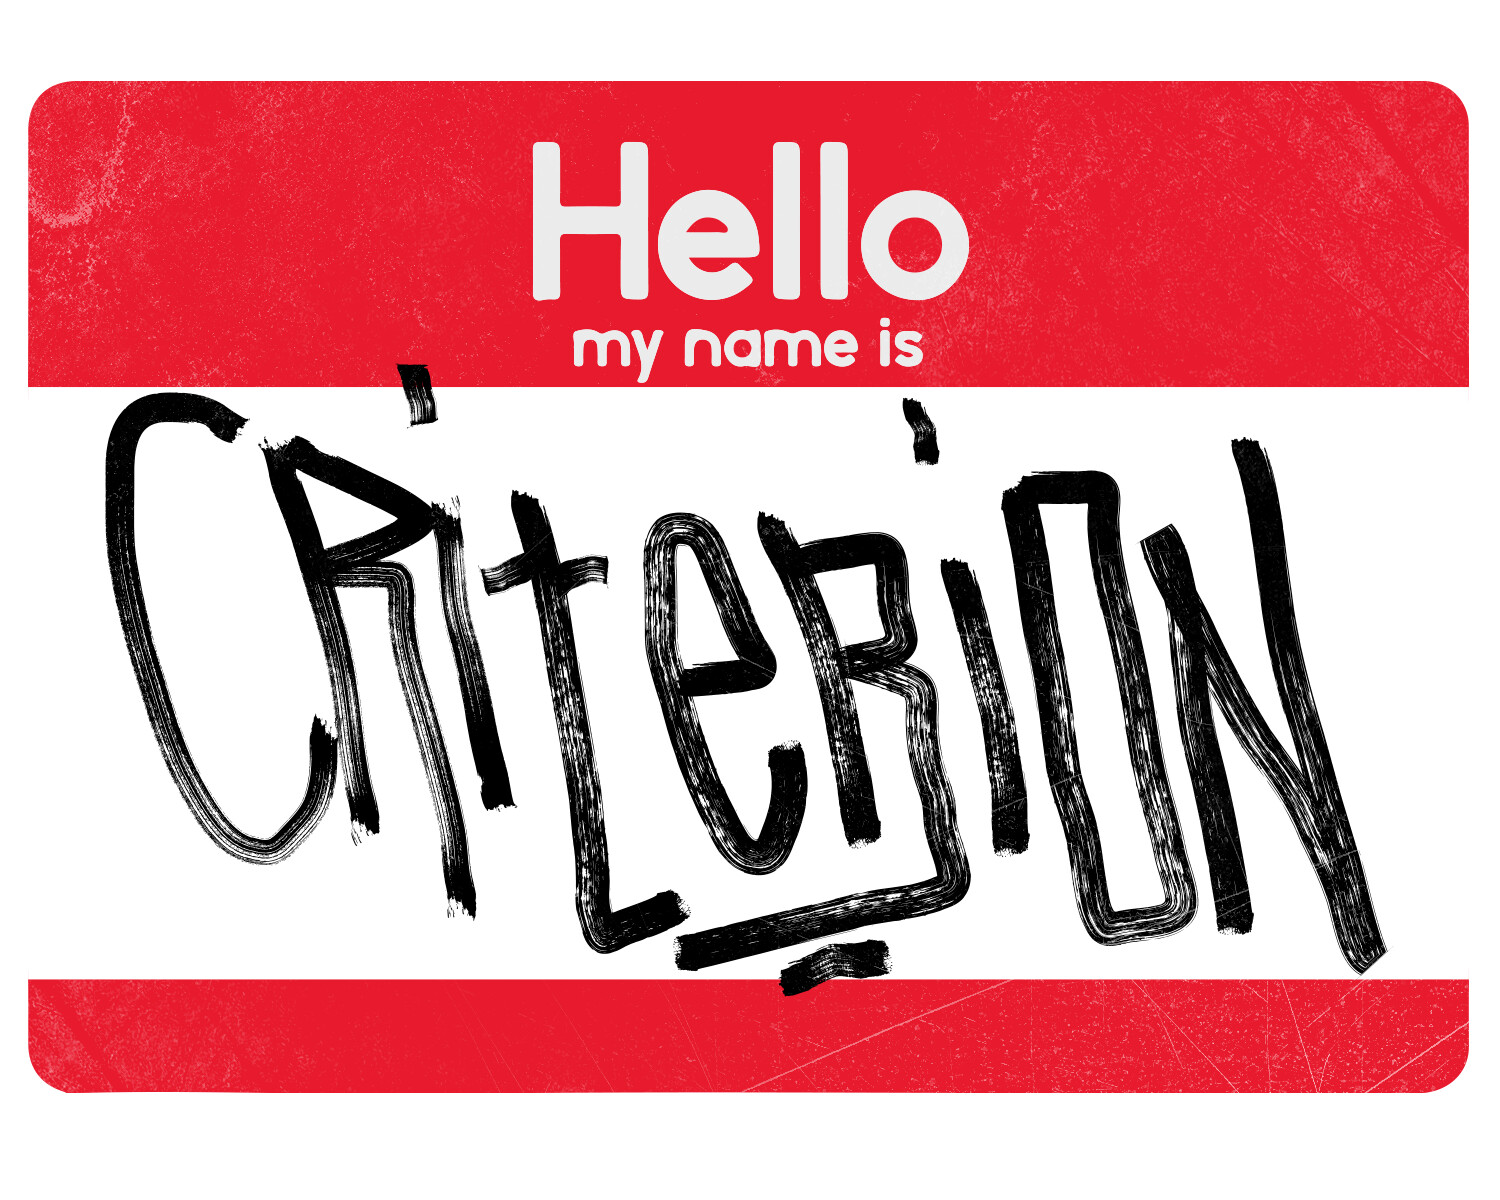 Hello my names is Criterion.